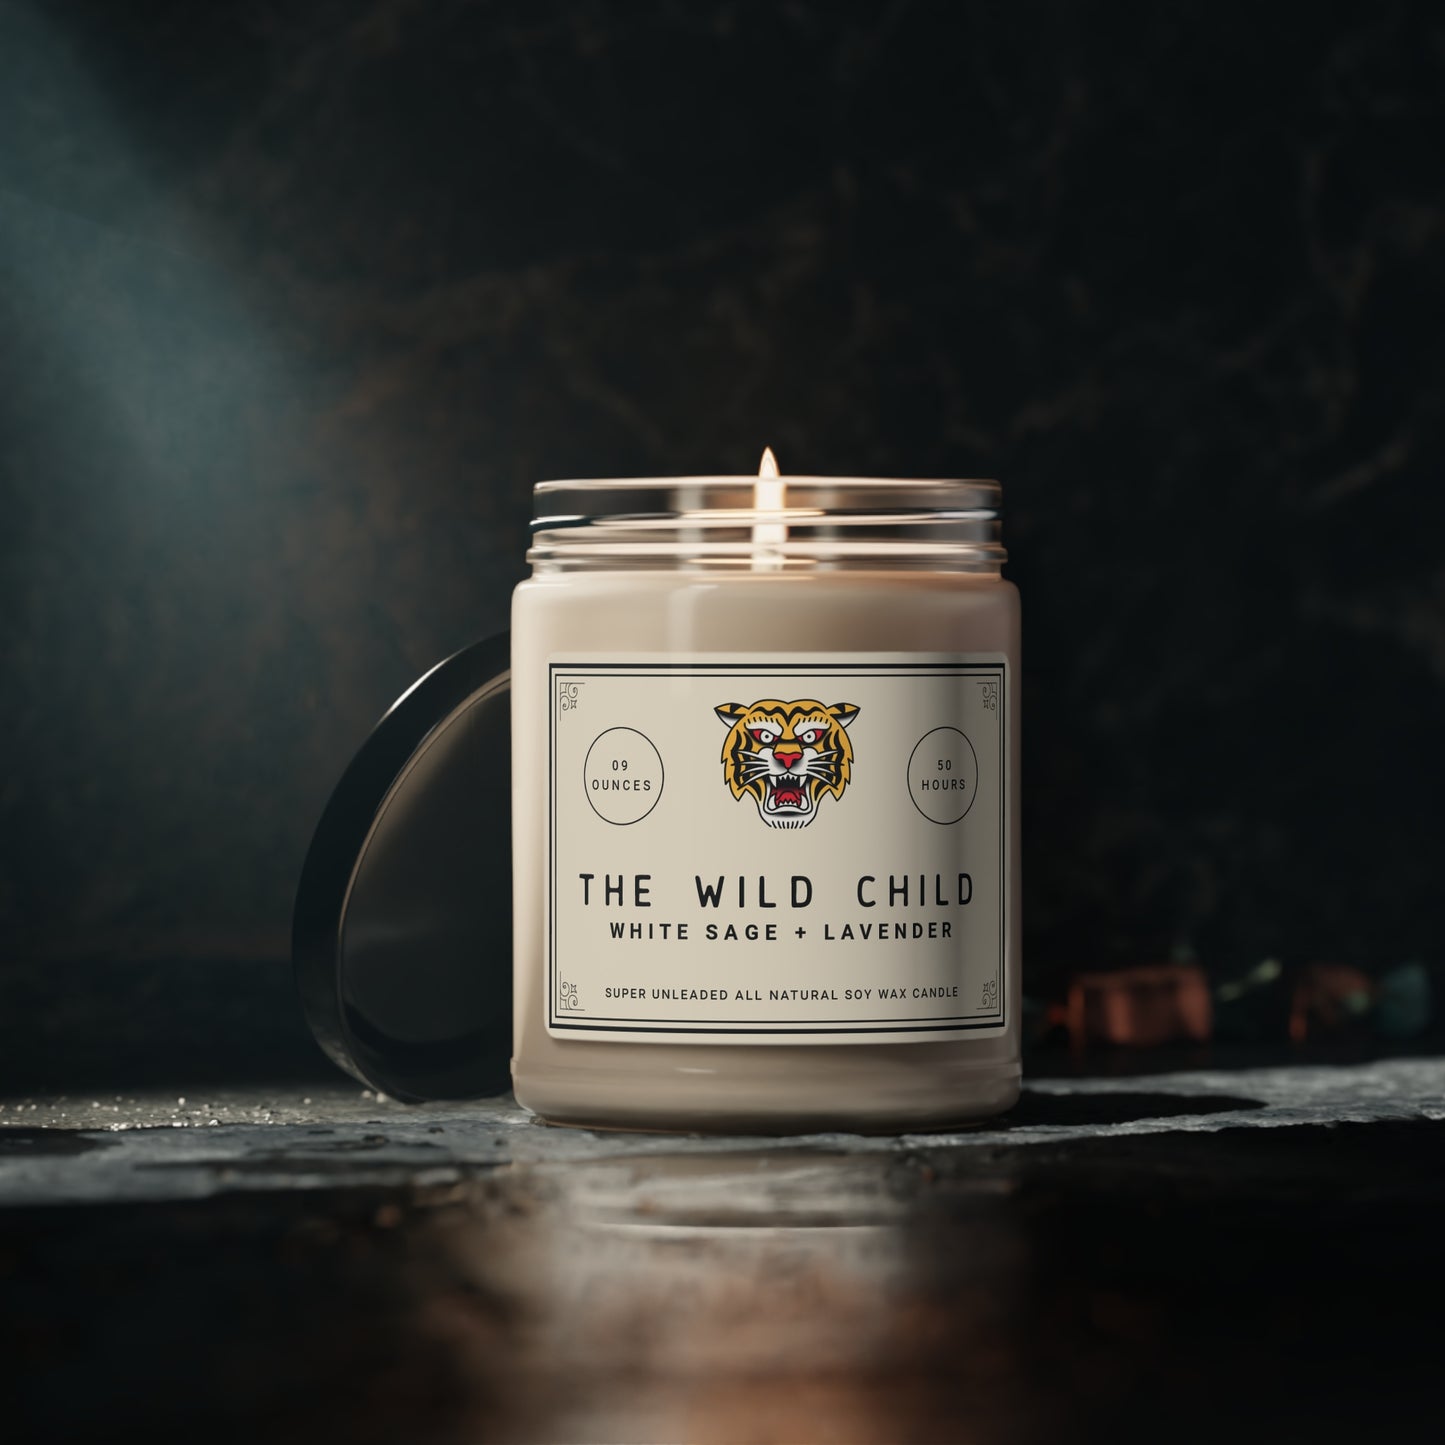 The Wild Child (White Sage + Lavender) Soy Candle